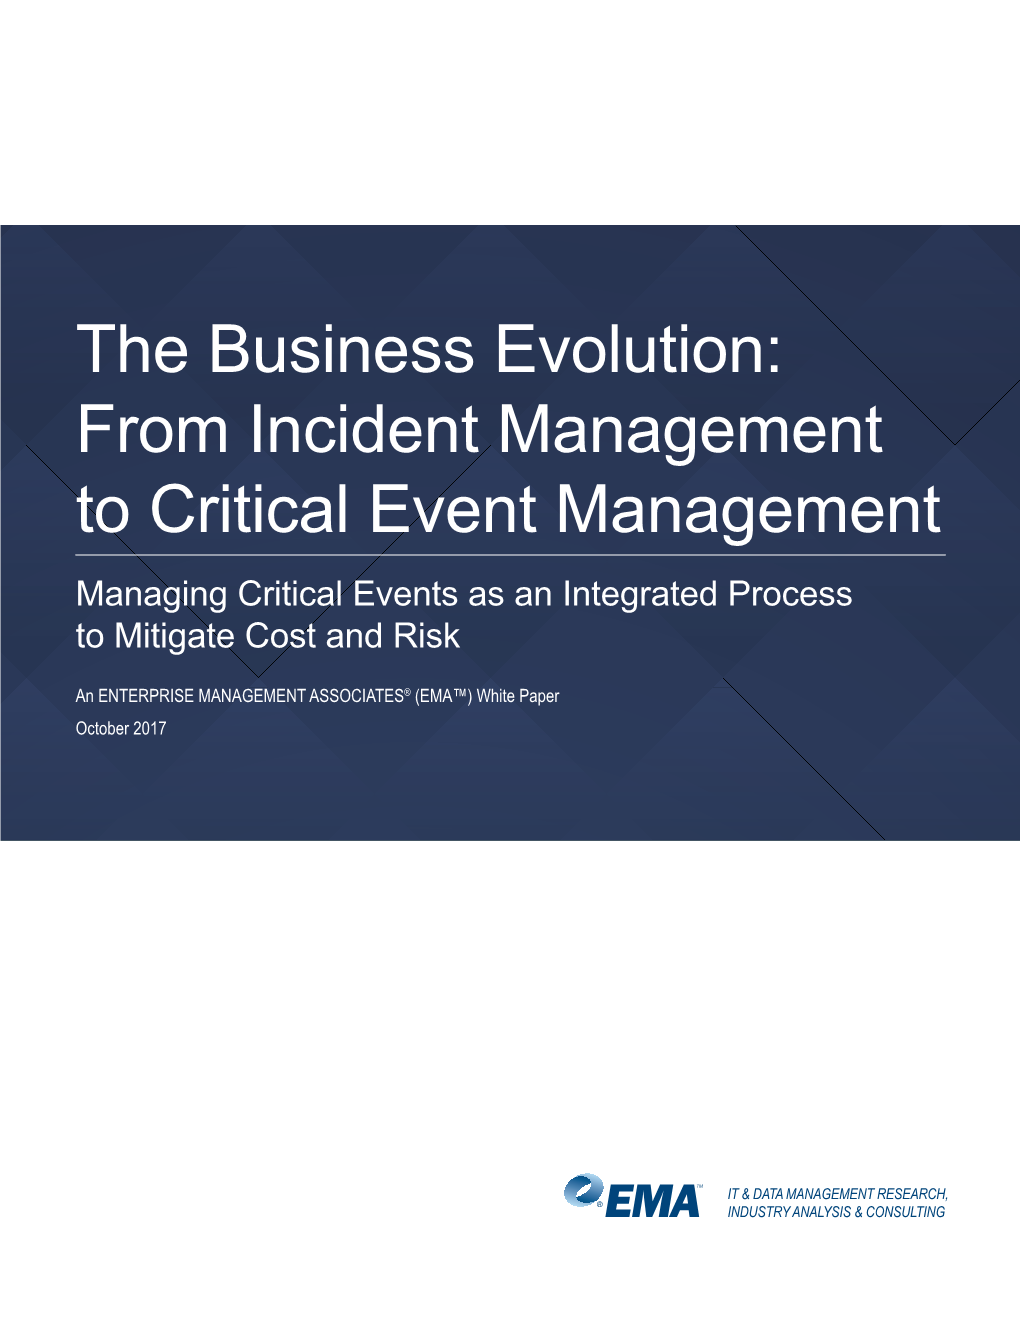 The Business Evolution: from Incident Management to Critical Event Management Managing Critical Events As an Integrated Process to Mitigate Cost and Risk